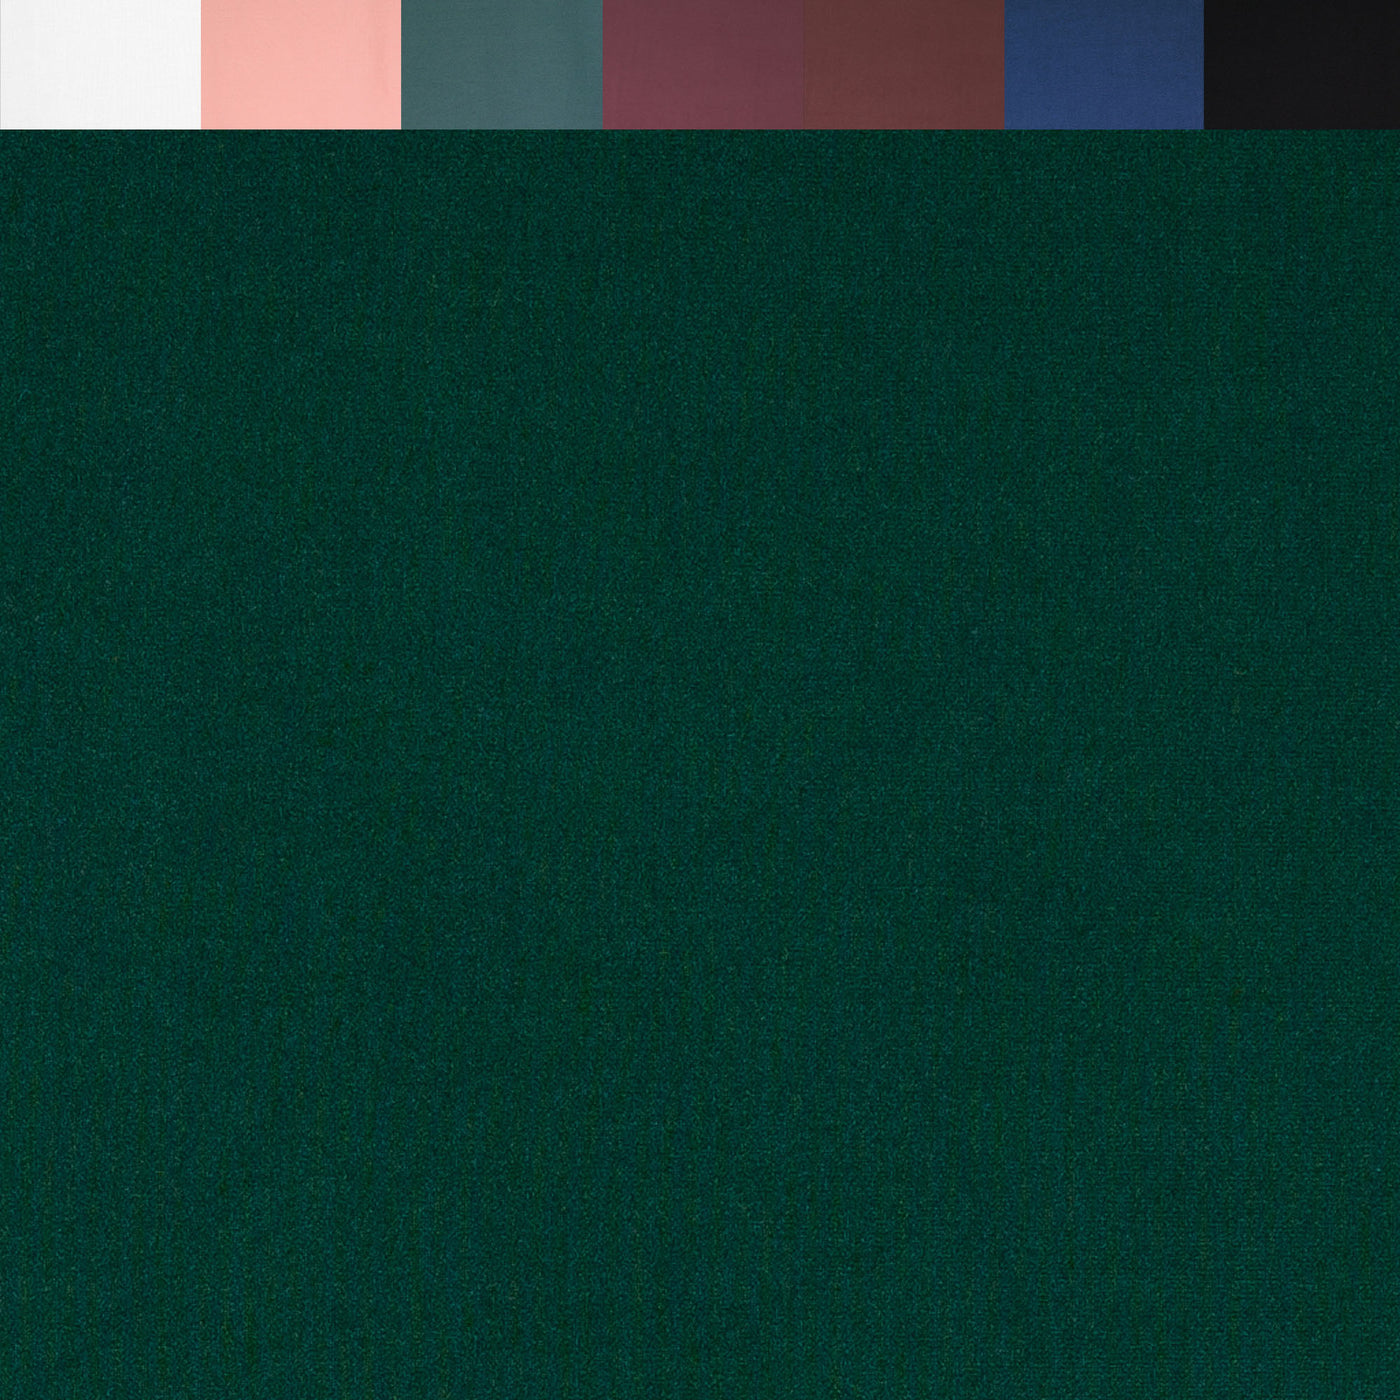 FabricLA | DTY Double Brushed Polyester Spandex Knit Fabric | Sold by the Yard | Shorts, pants, sleeveless blouses, T-shirts | Hunter Green - FabricLA.com